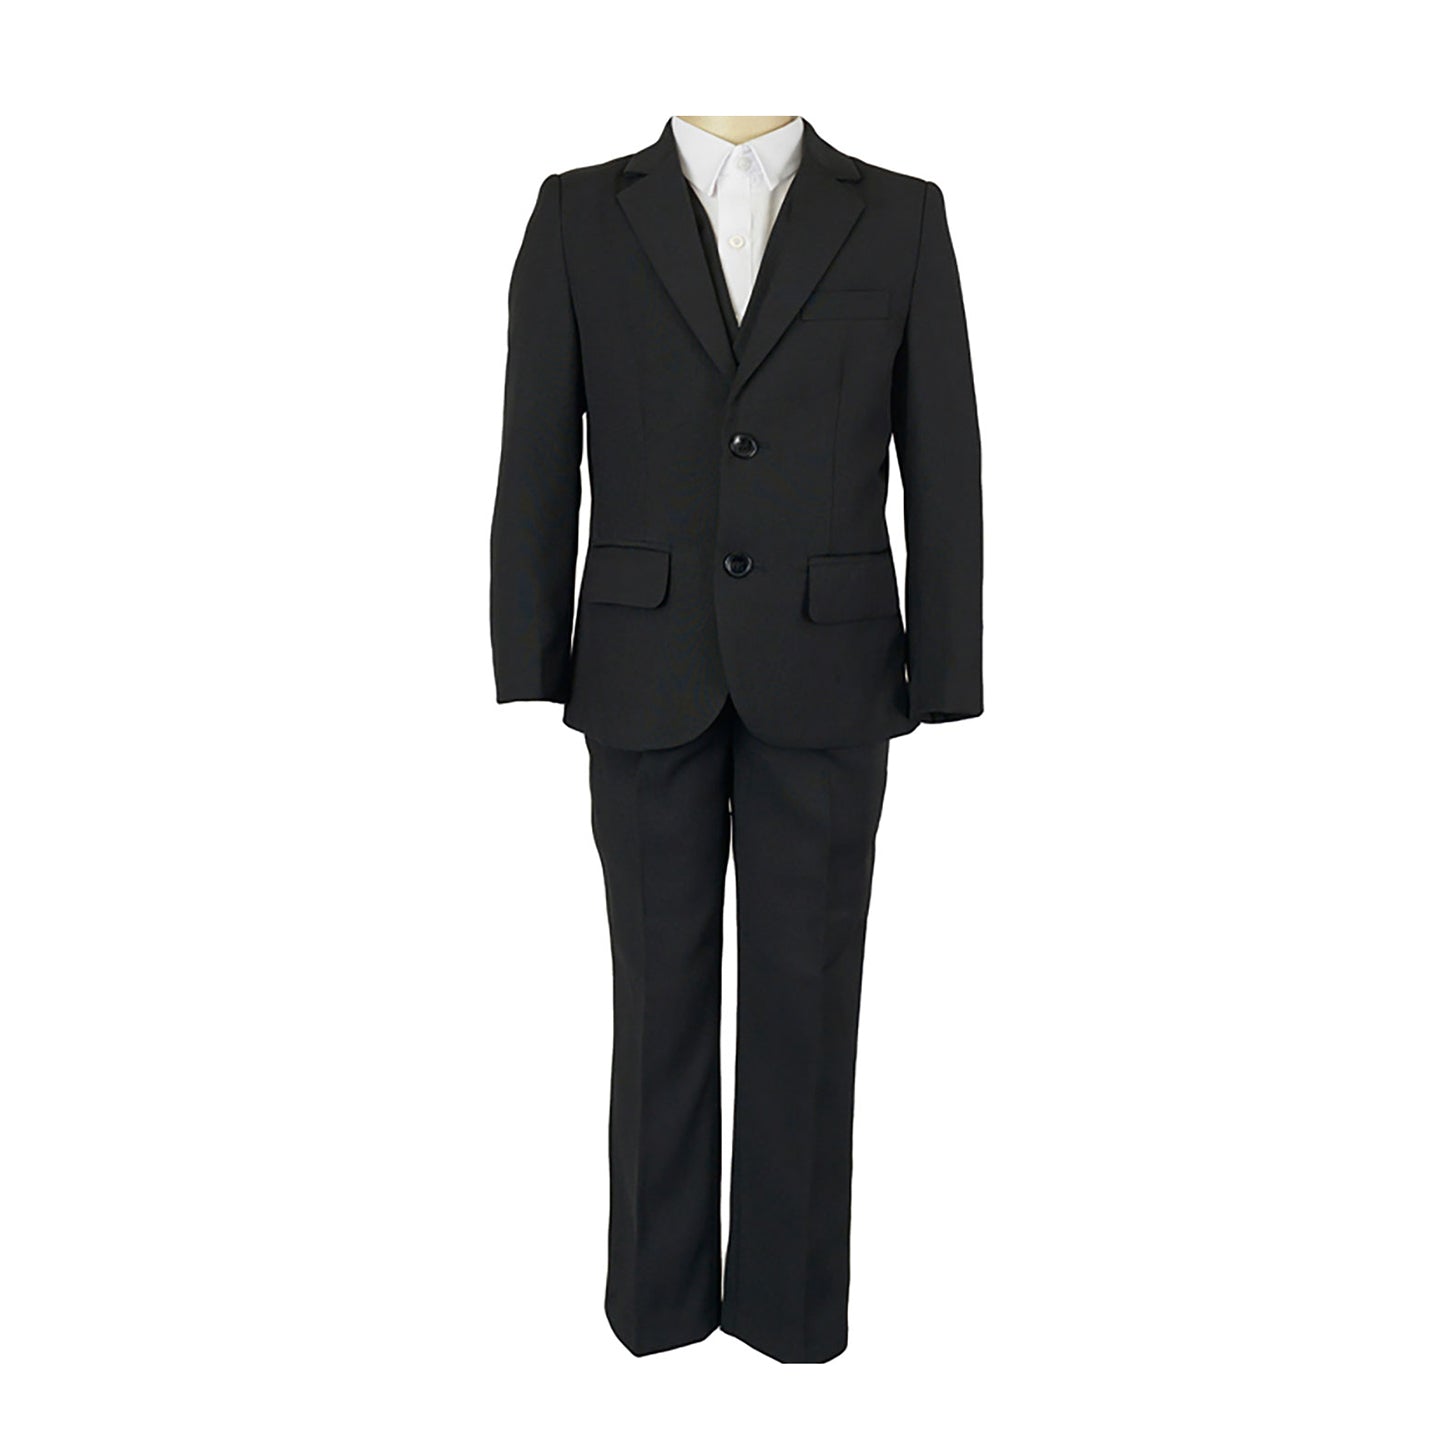 Boys' Formal Black Suit, 4 Piece Set (Size 8 Years to 16 Years)